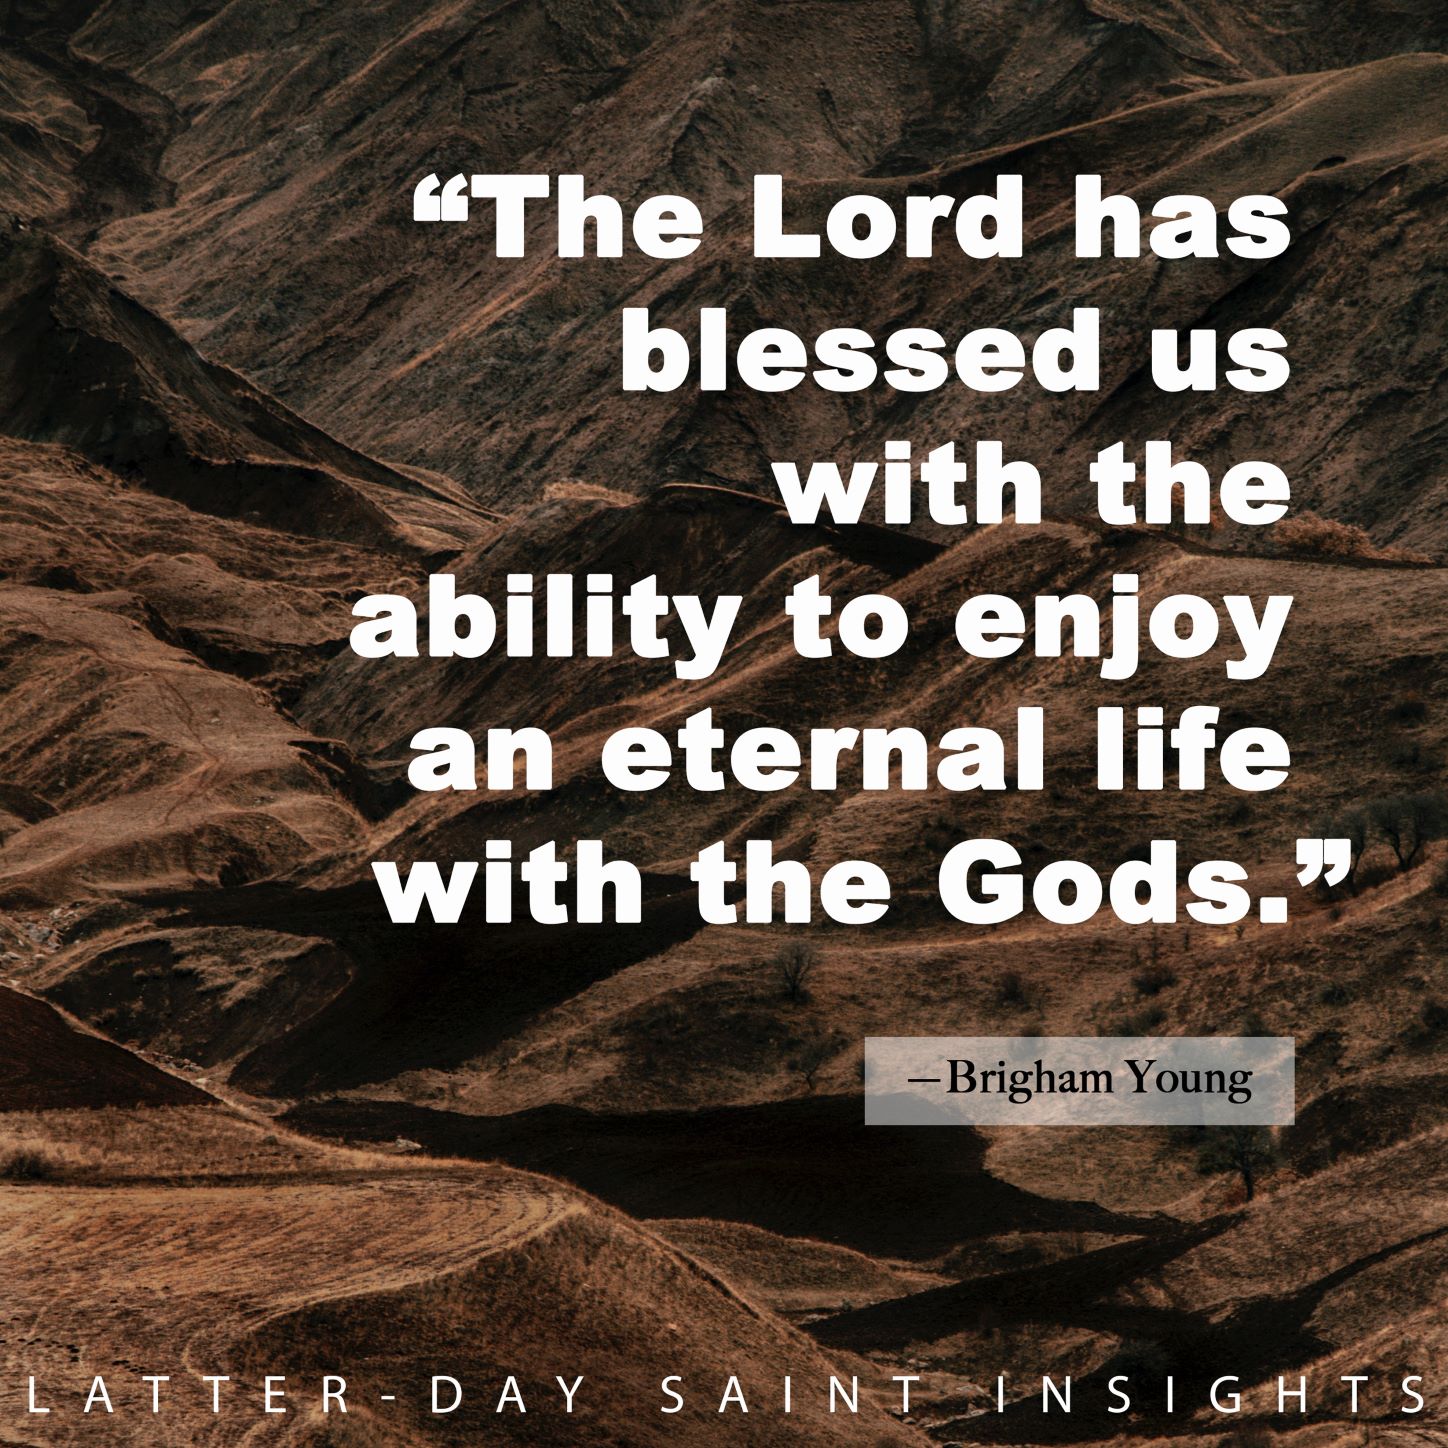 The Lord has blessed us with the ability to enjoy an eternal life with the Gods. -brigham Young